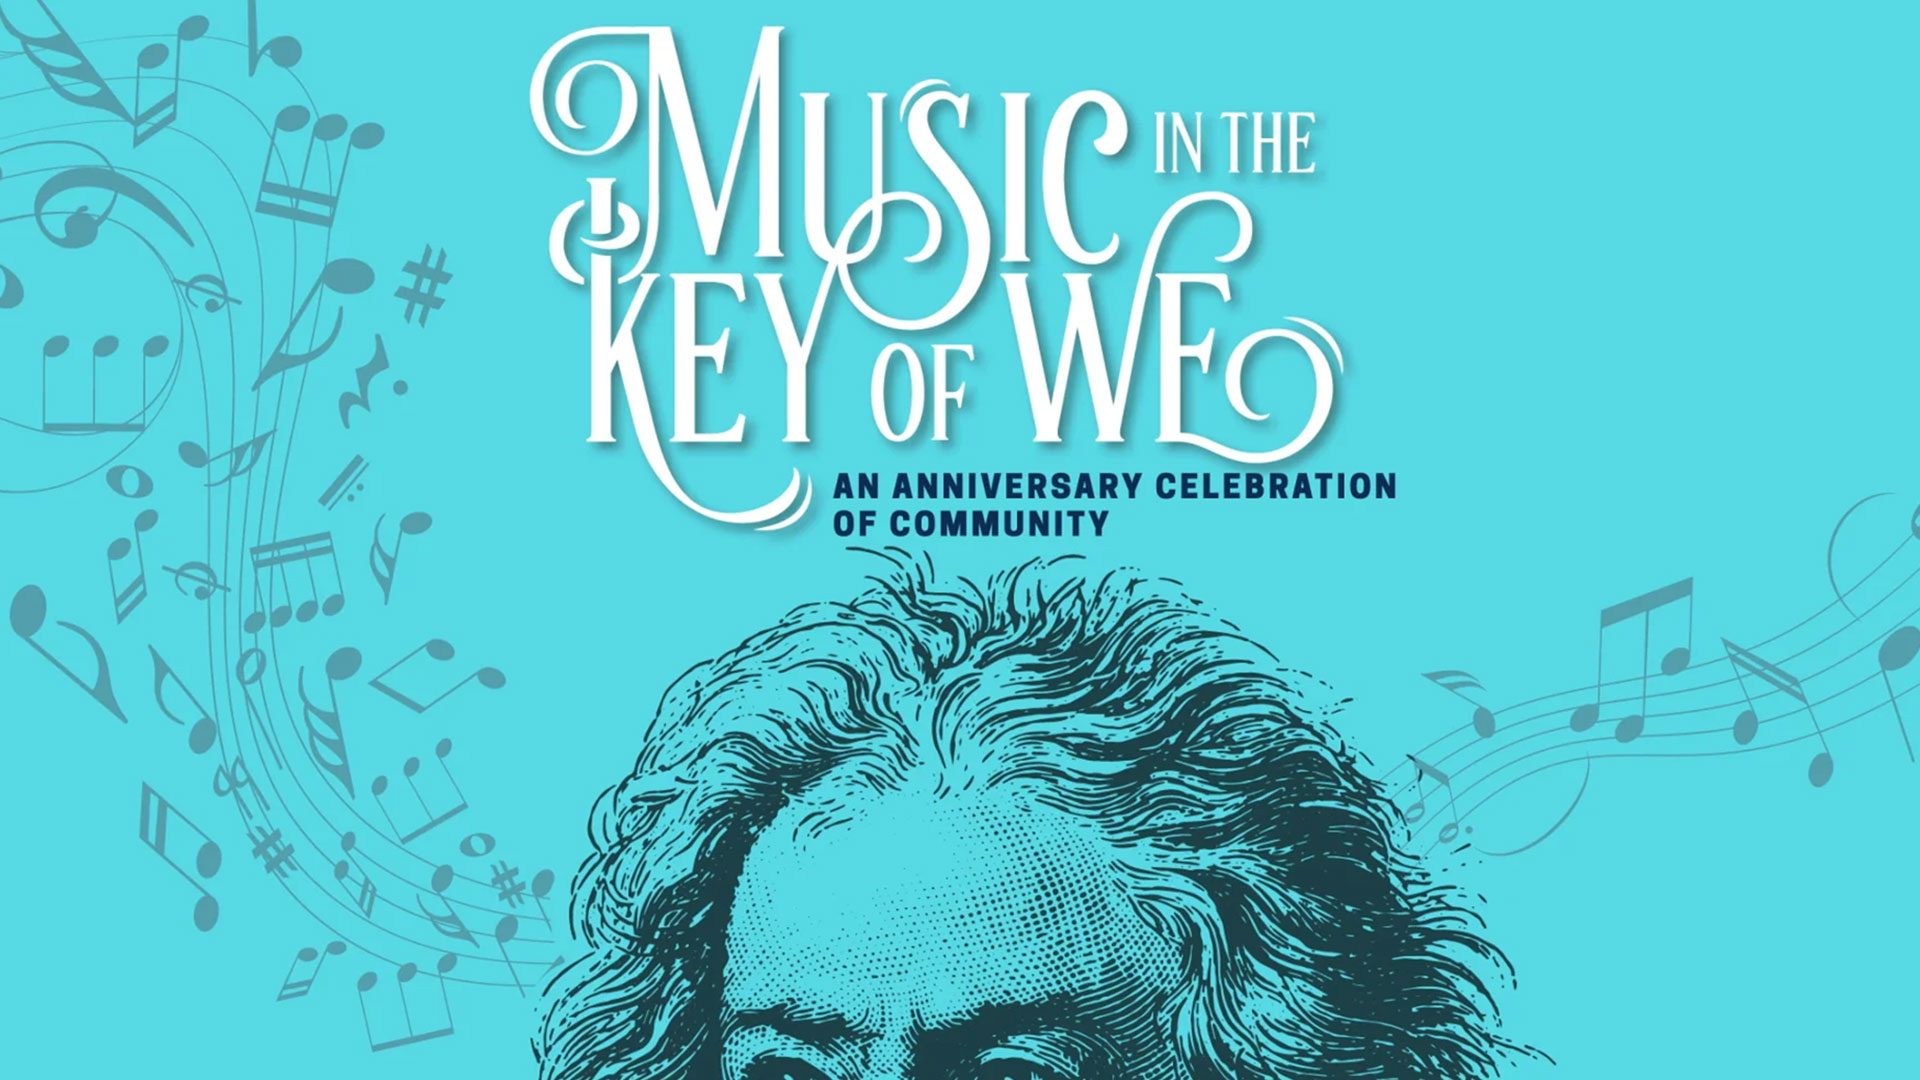 Harrisburg Symphony Orchestra’s “Music in the Key of We” event